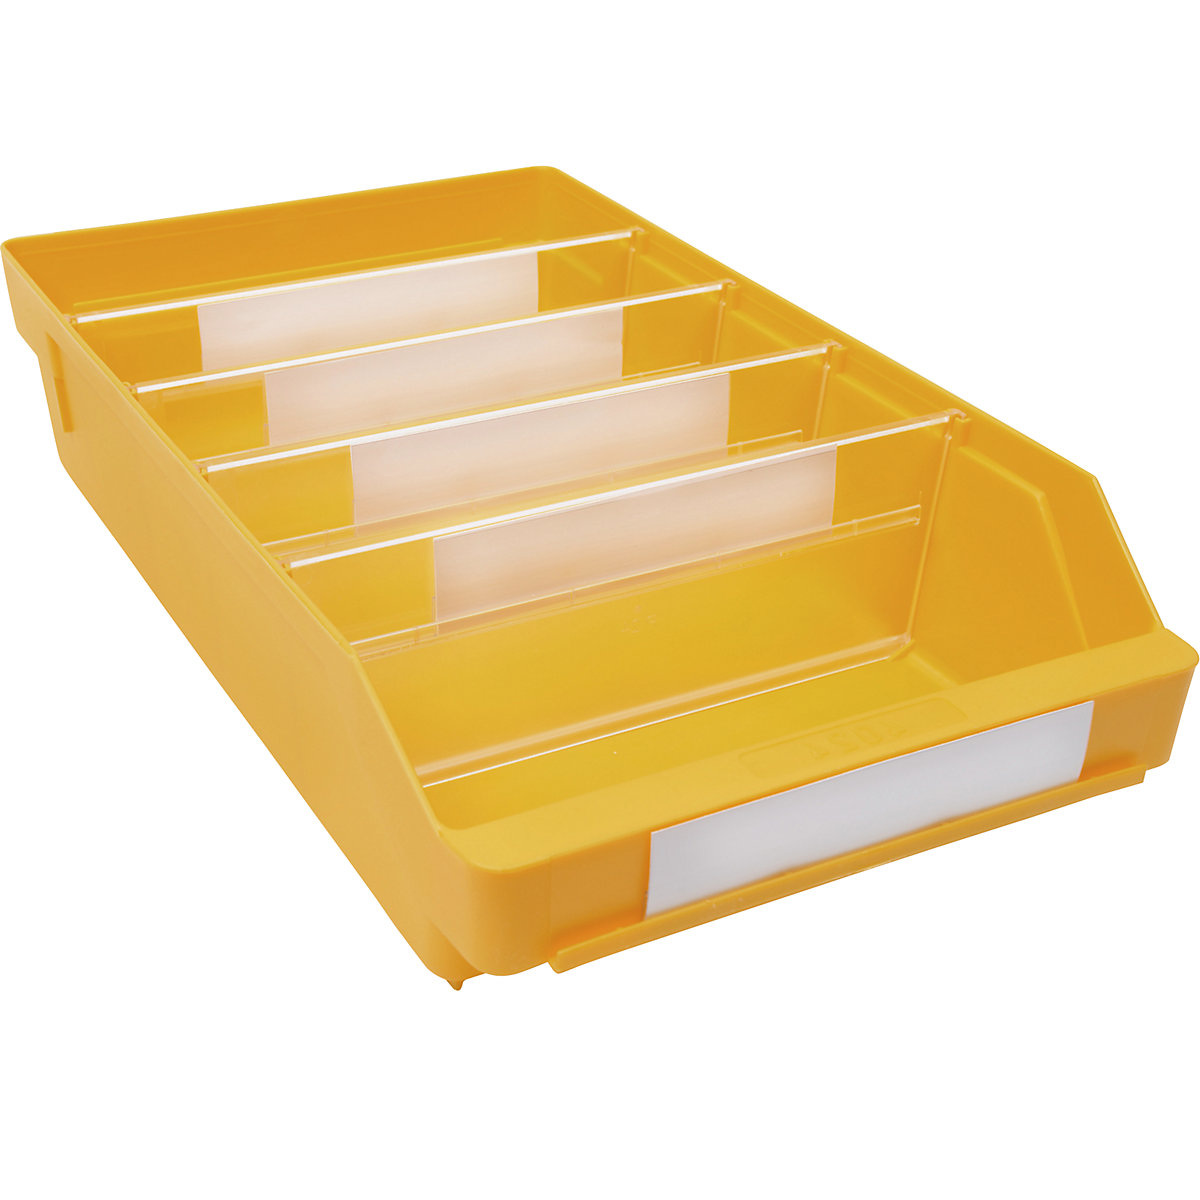 Shelf bin made of highly impact resistant polypropylene – STEMO, yellow, LxWxH 400 x 240 x 95 mm, pack of 15-12